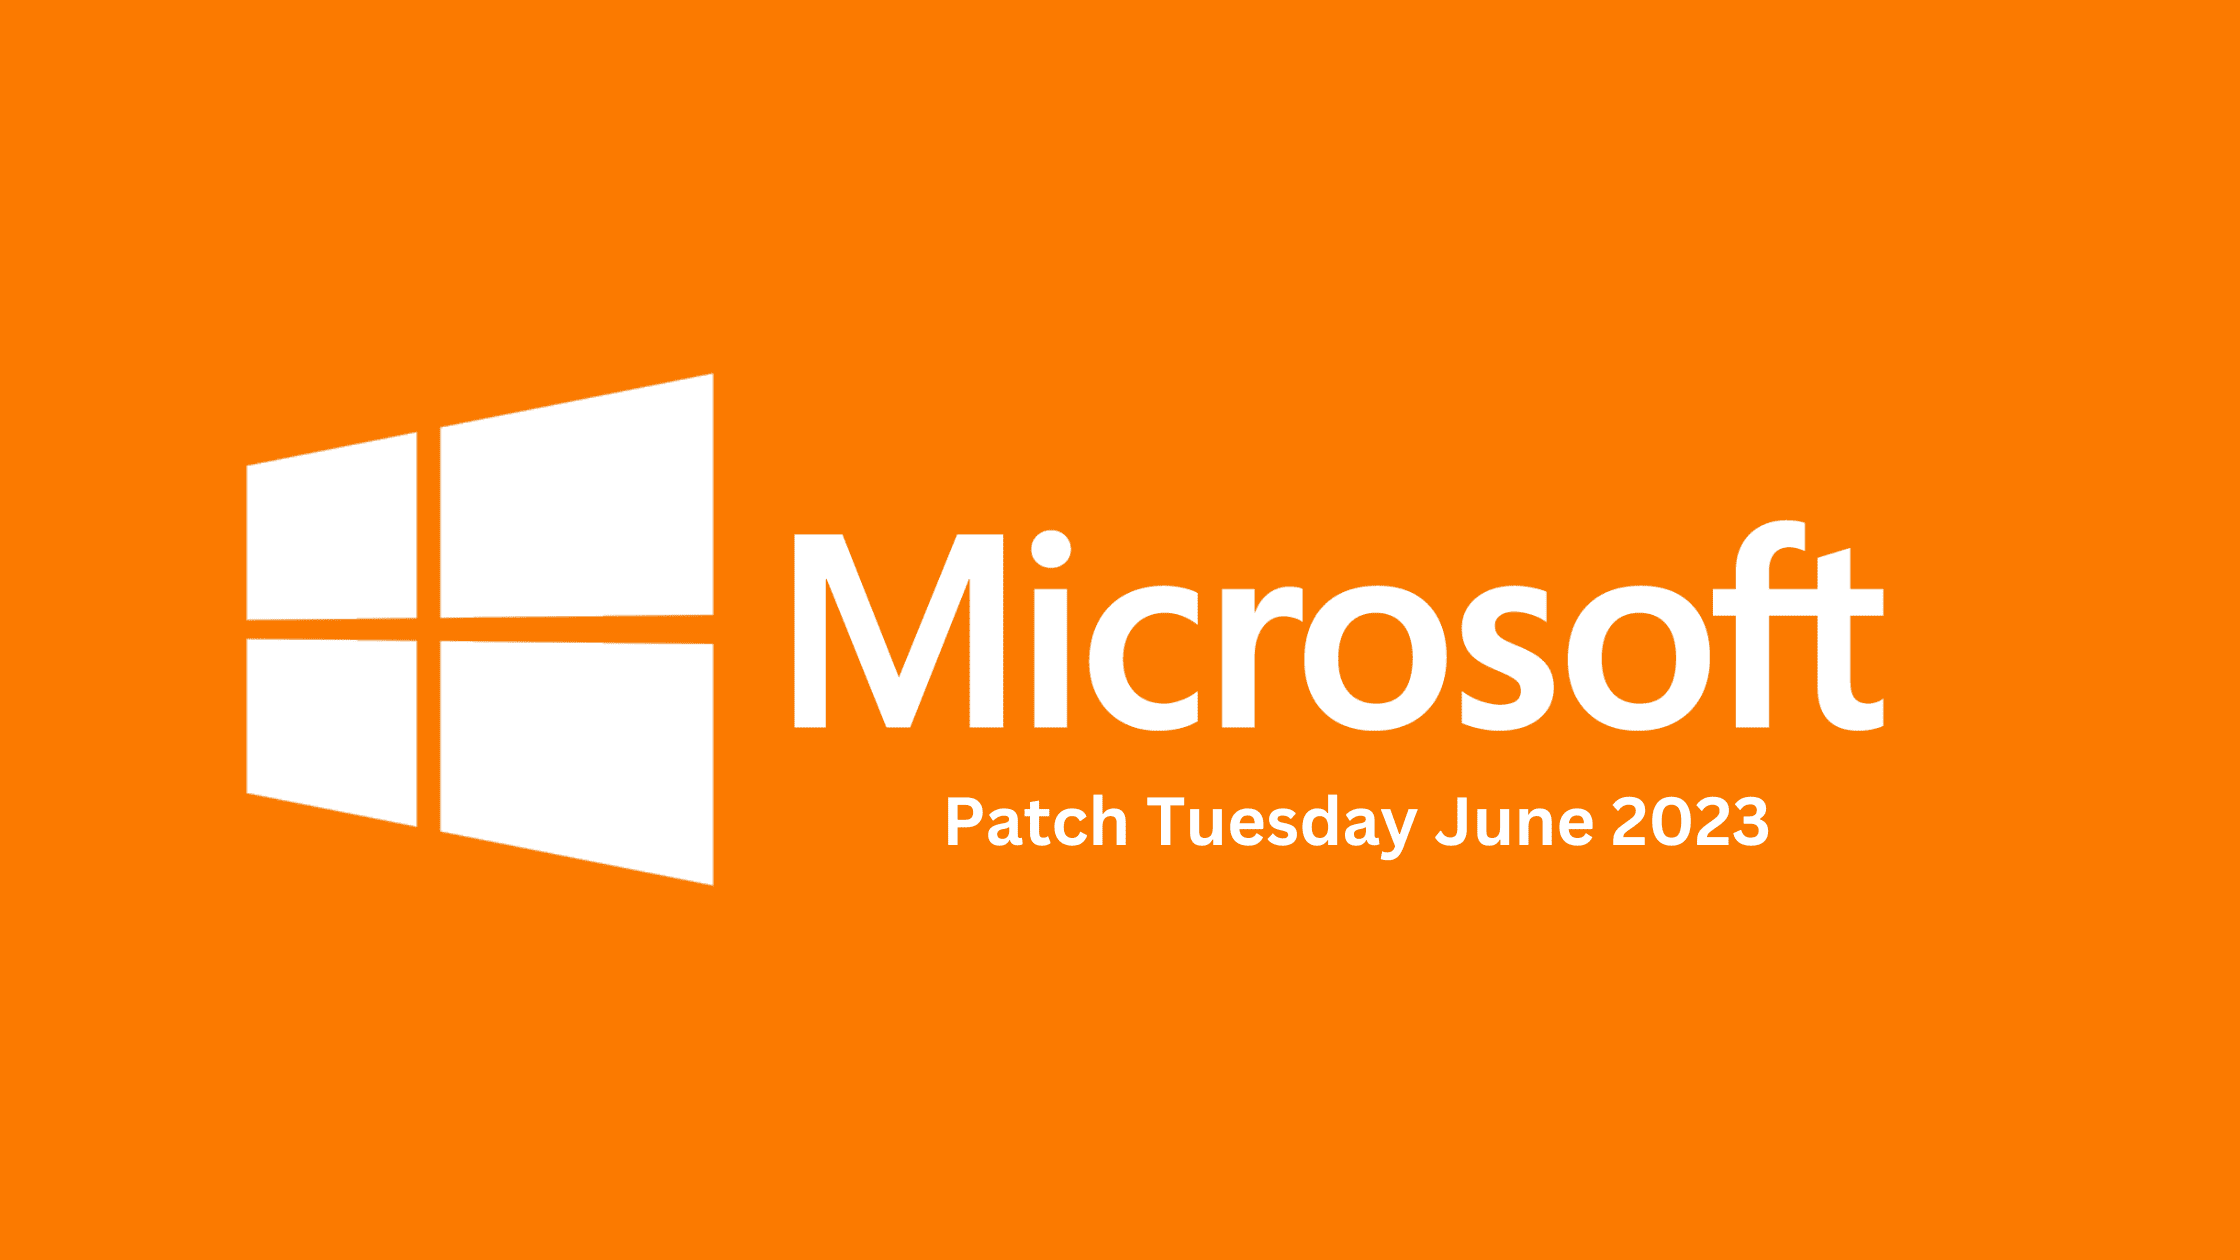 Breaking Down The Latest June 2023 Patch Tuesday Report